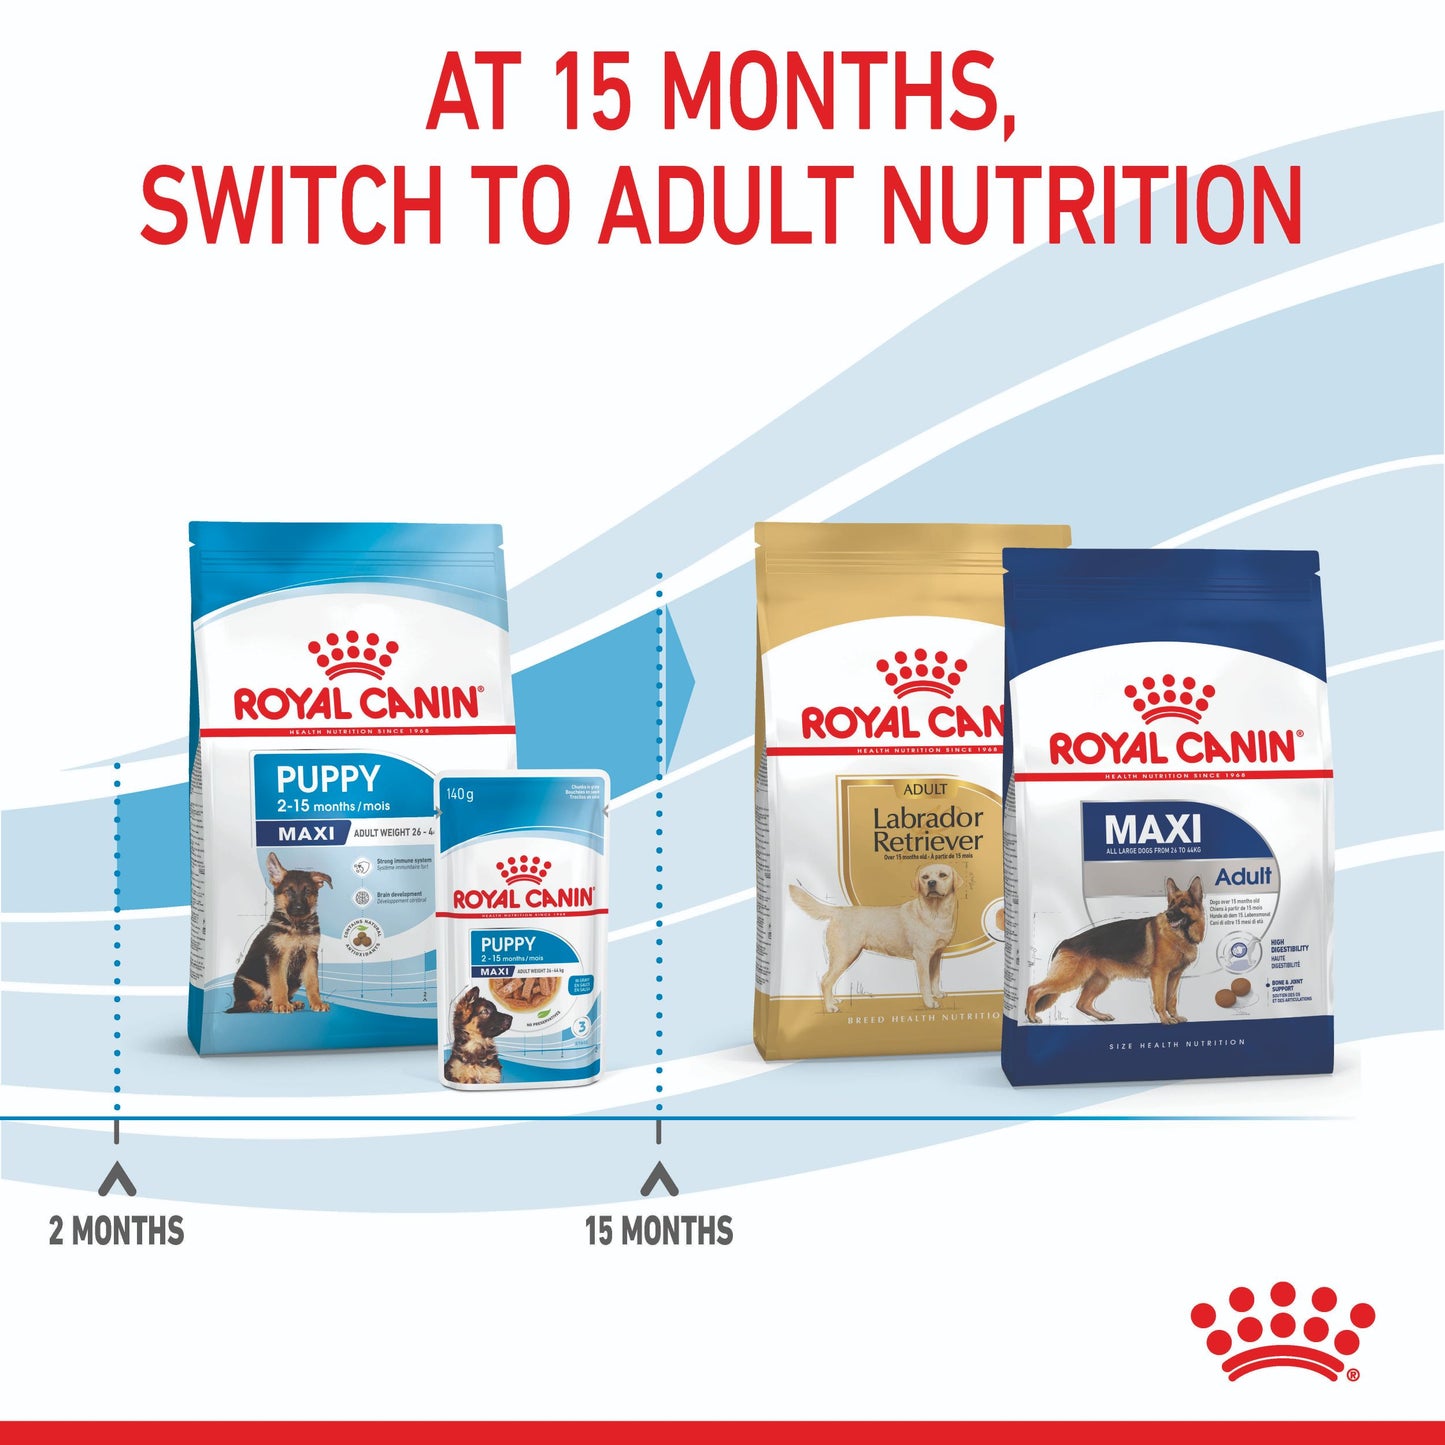 Royal Canin Maxi Large Breed Puppy Chicken Dry Dog Food